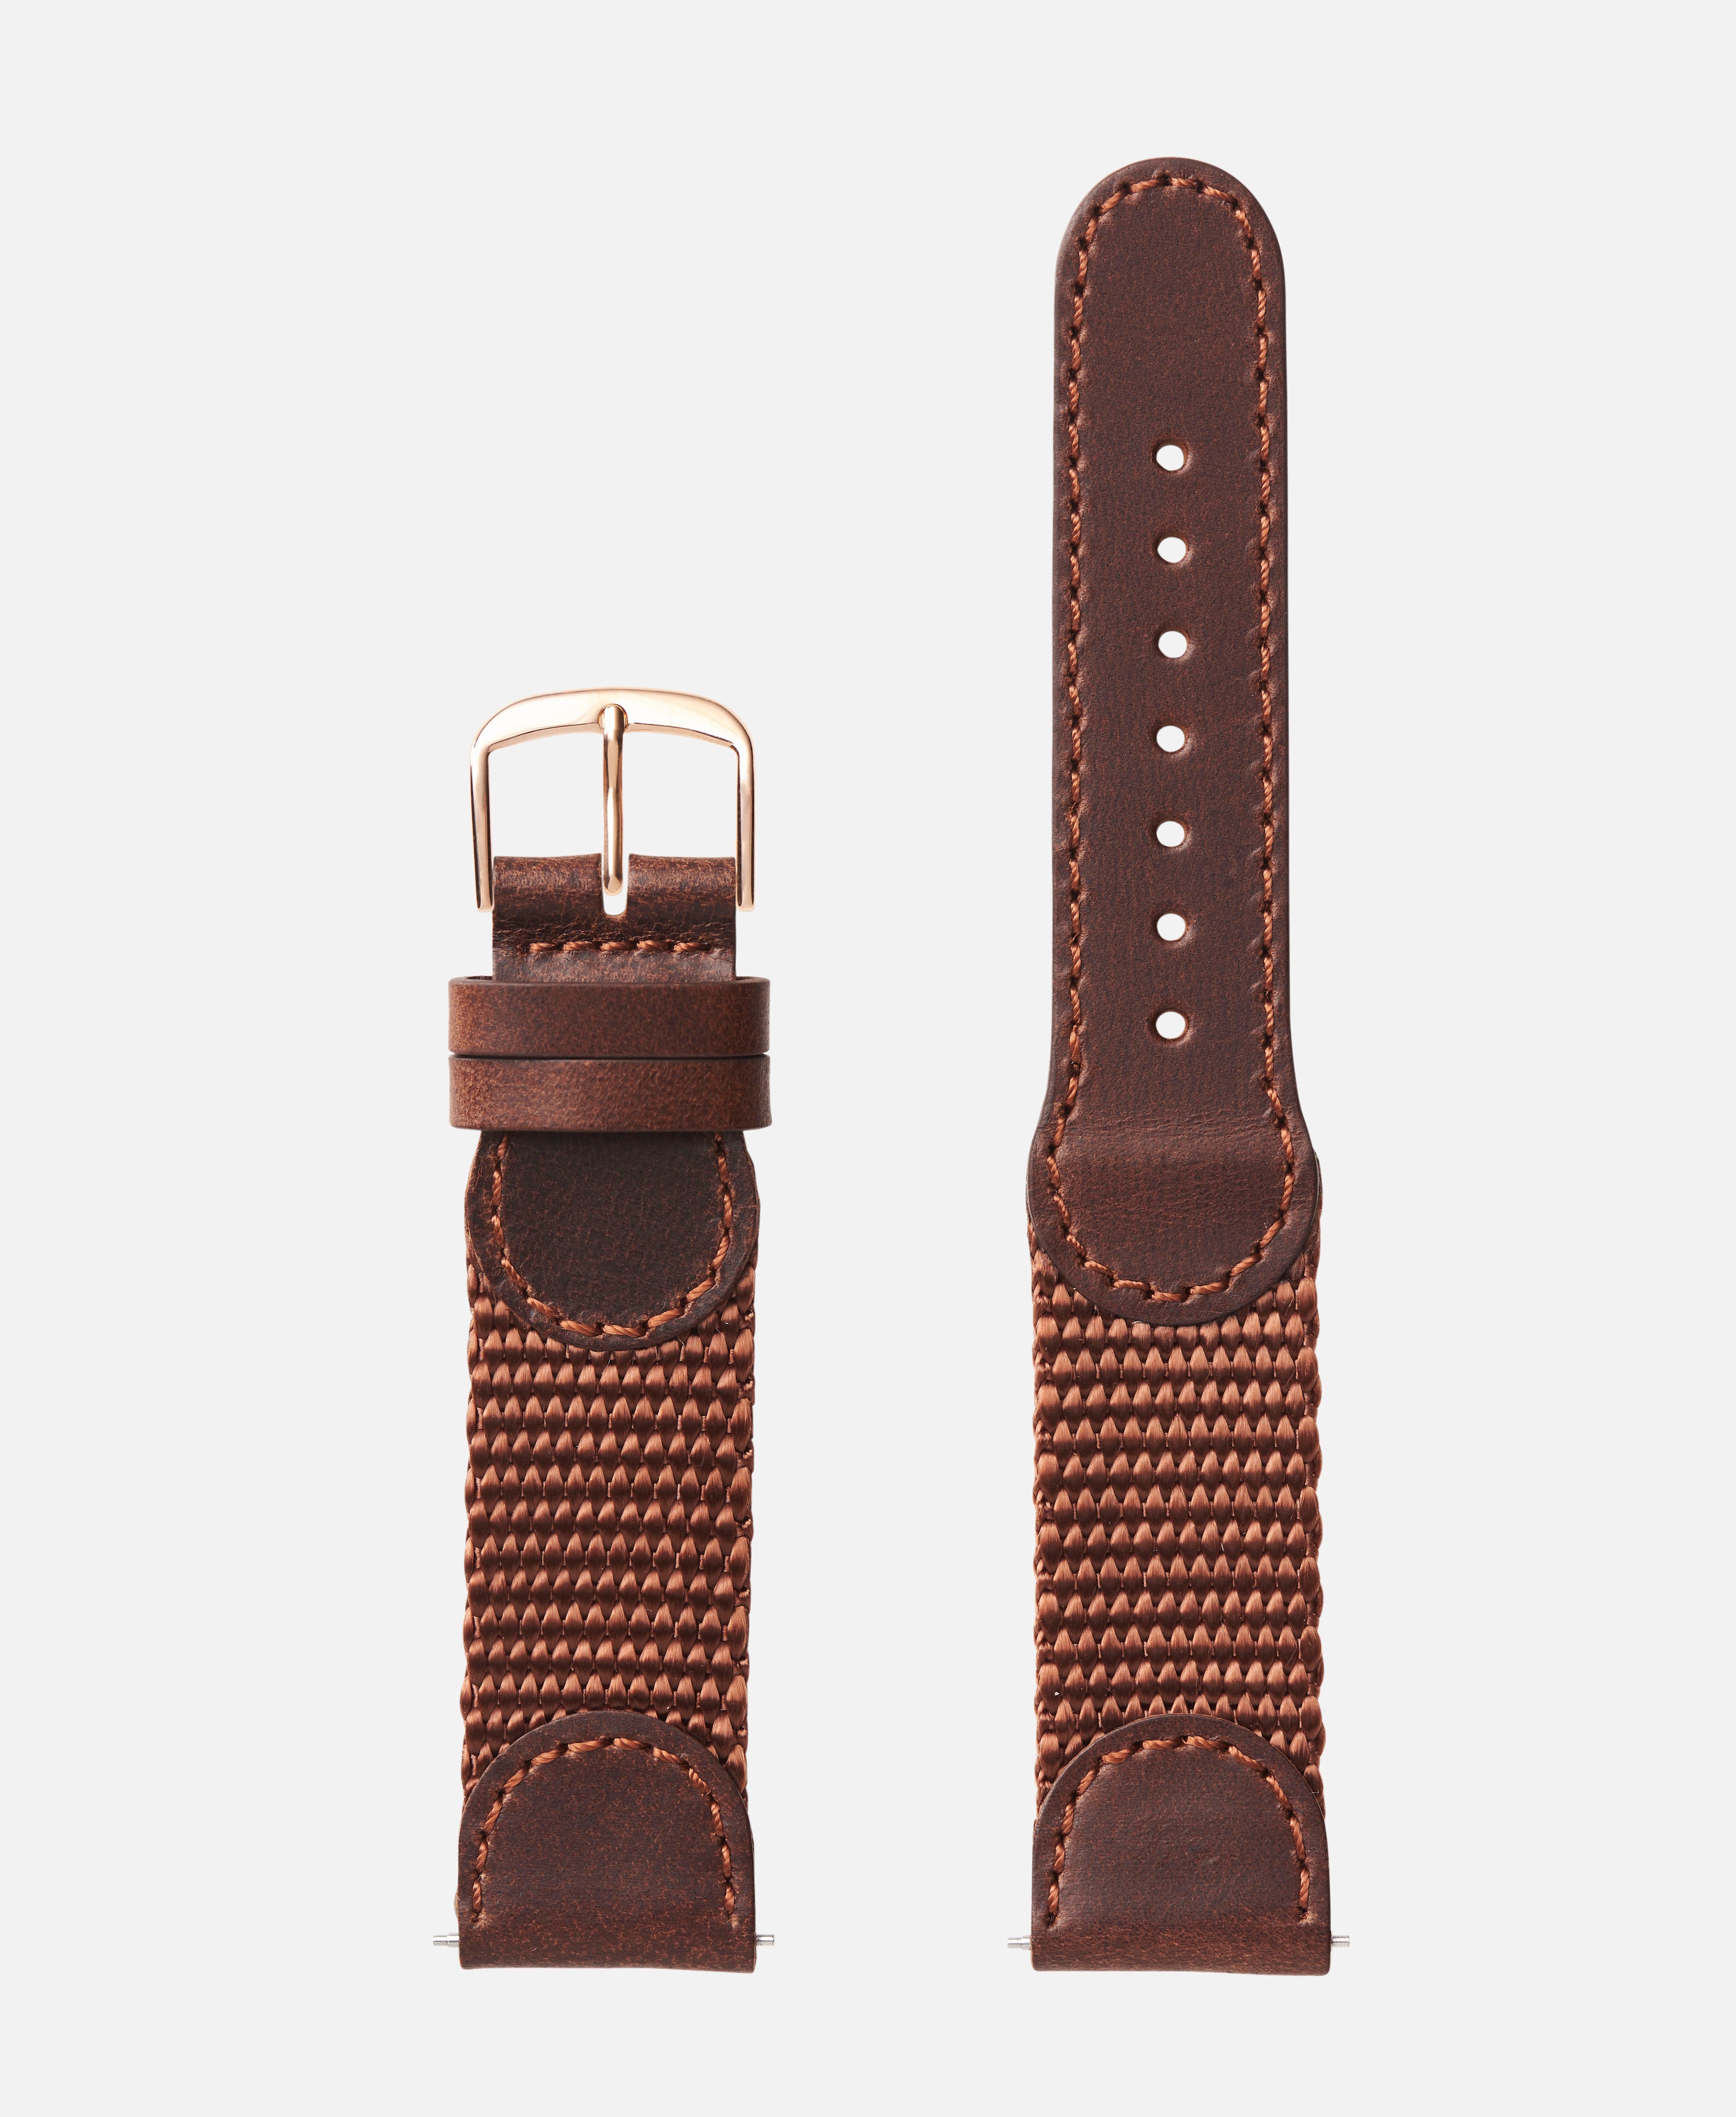 Swiss Army Style Leather | Traditional